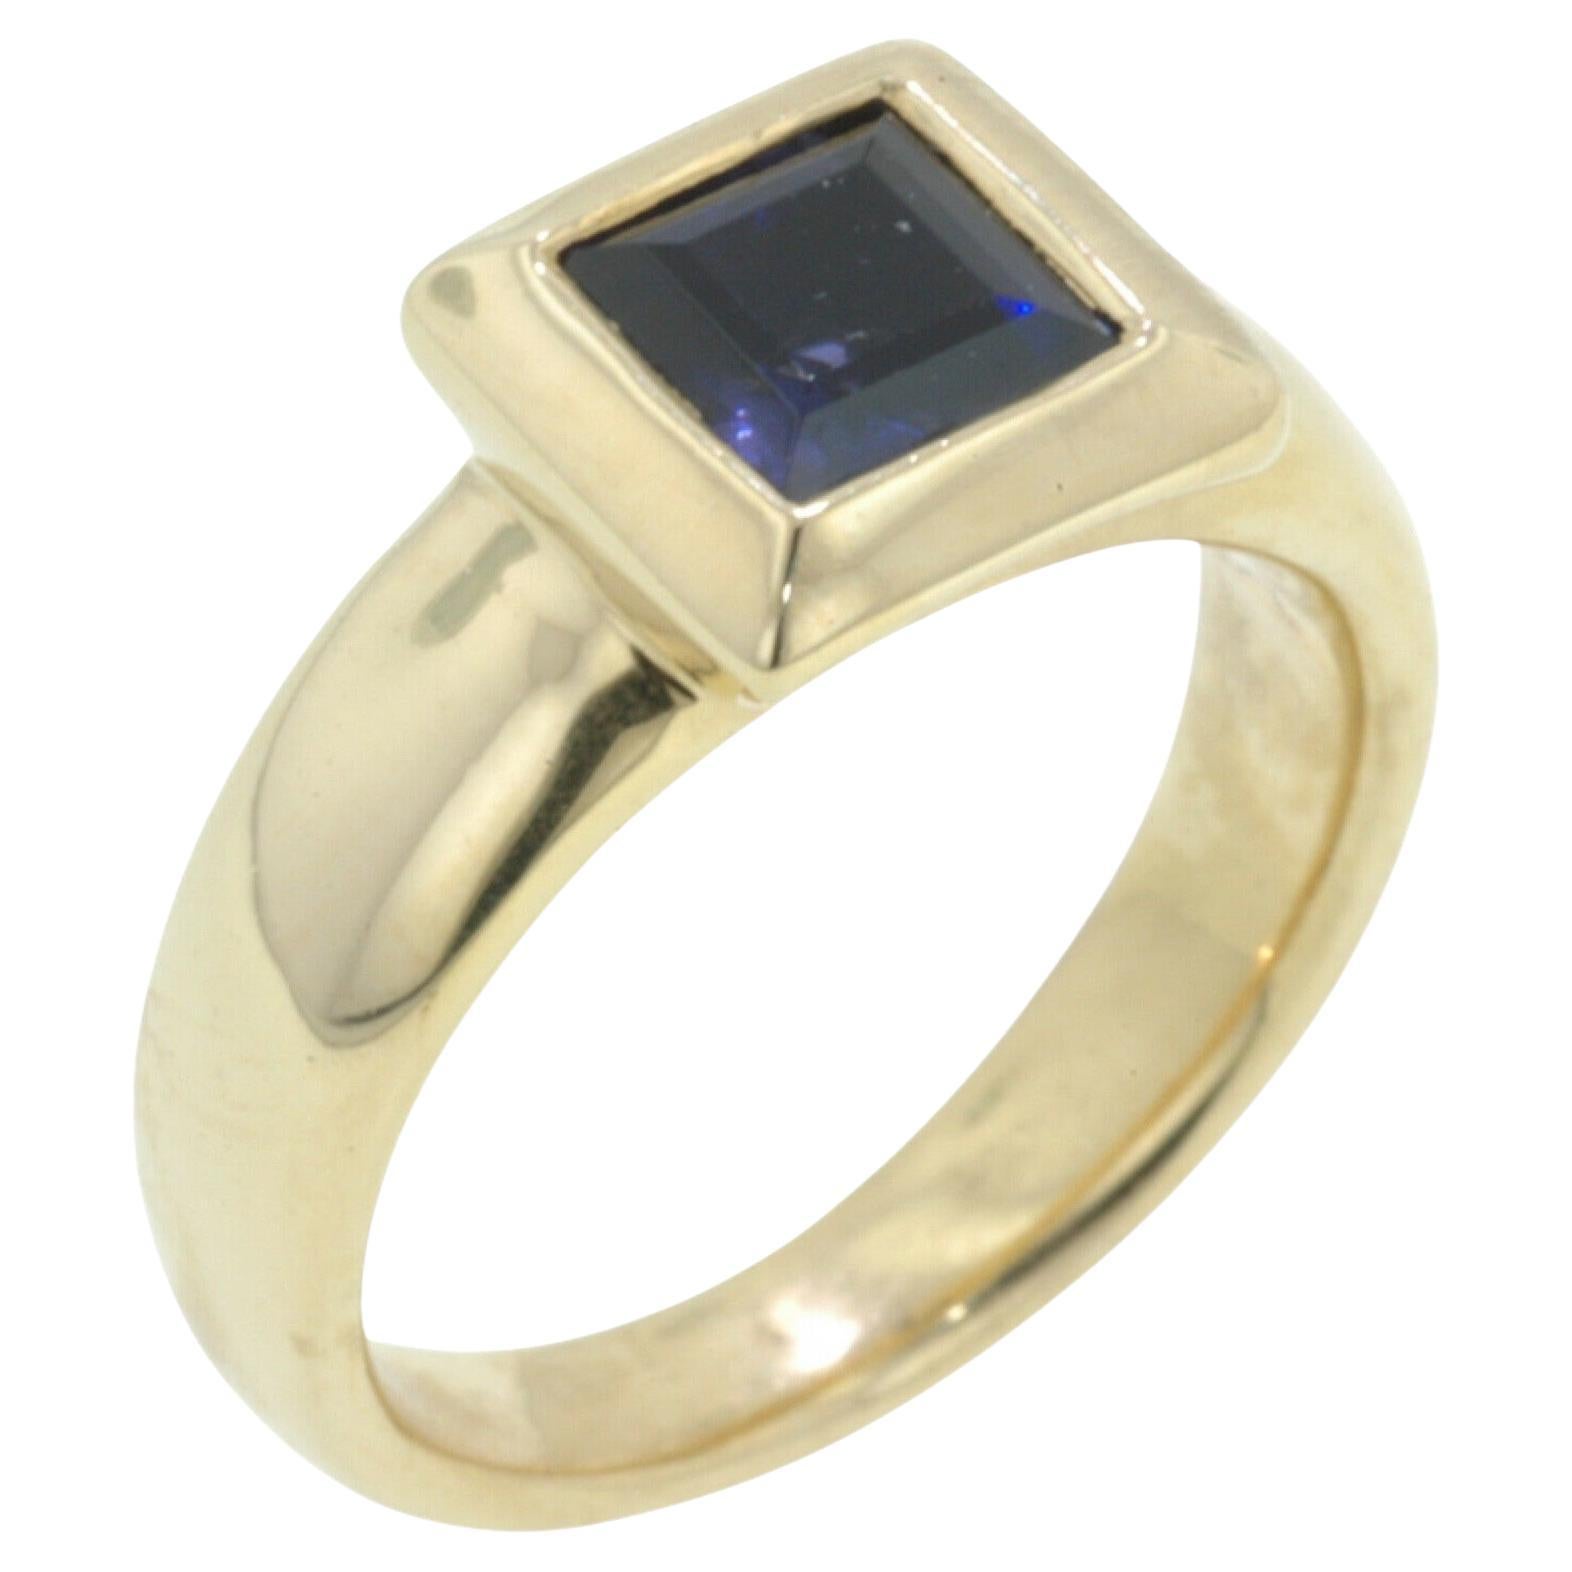 Hammer & Sohne 18K Yellow Gold Ring with Square Cut Faceted Iolite